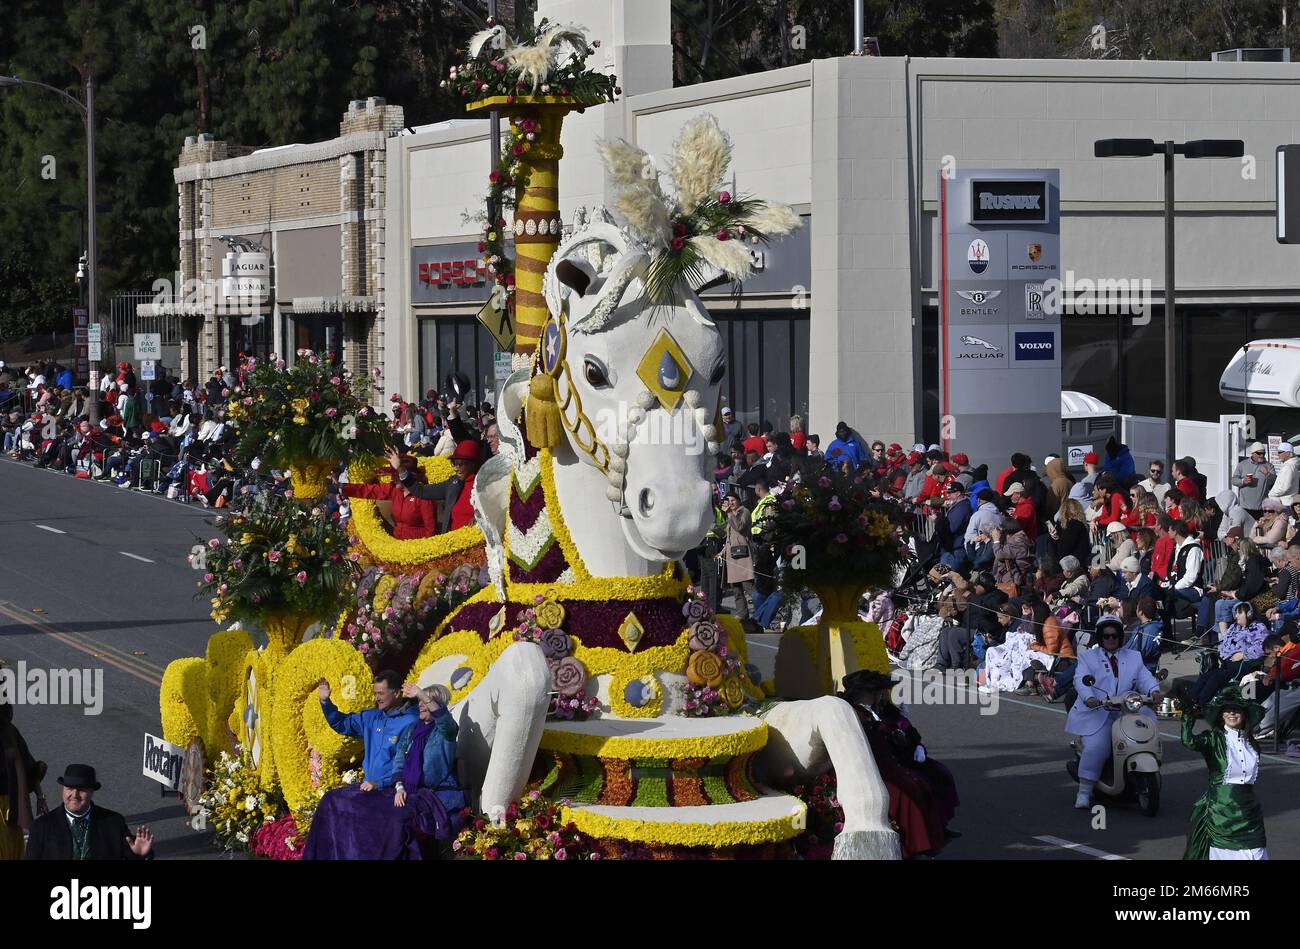 Pasadena, United States. 02nd Jan, 2023. Rotary's 'Serving with Imagination and Hope''' float, winner of the Princess Award, makes its way down Colorado Boulevard during the 134th annual Tournament of Roses Parade held in Pasadena, California on Monday, January 2, 2023. Photo by Jim Ruymen/UPI. Credit: UPI/Alamy Live News Stock Photo